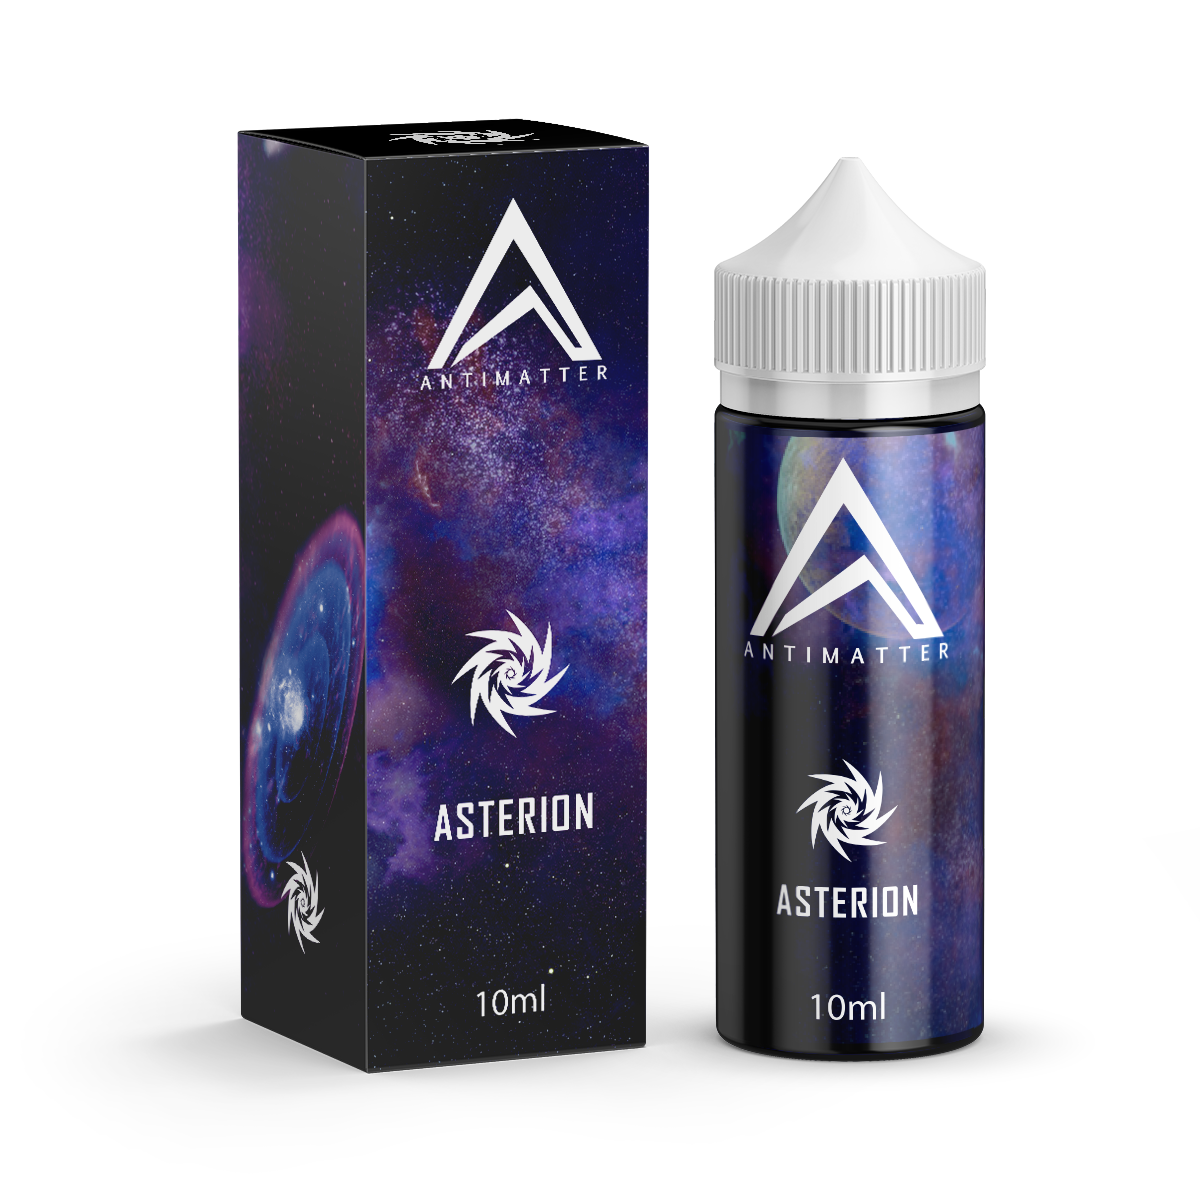 Antimatter - Asterion